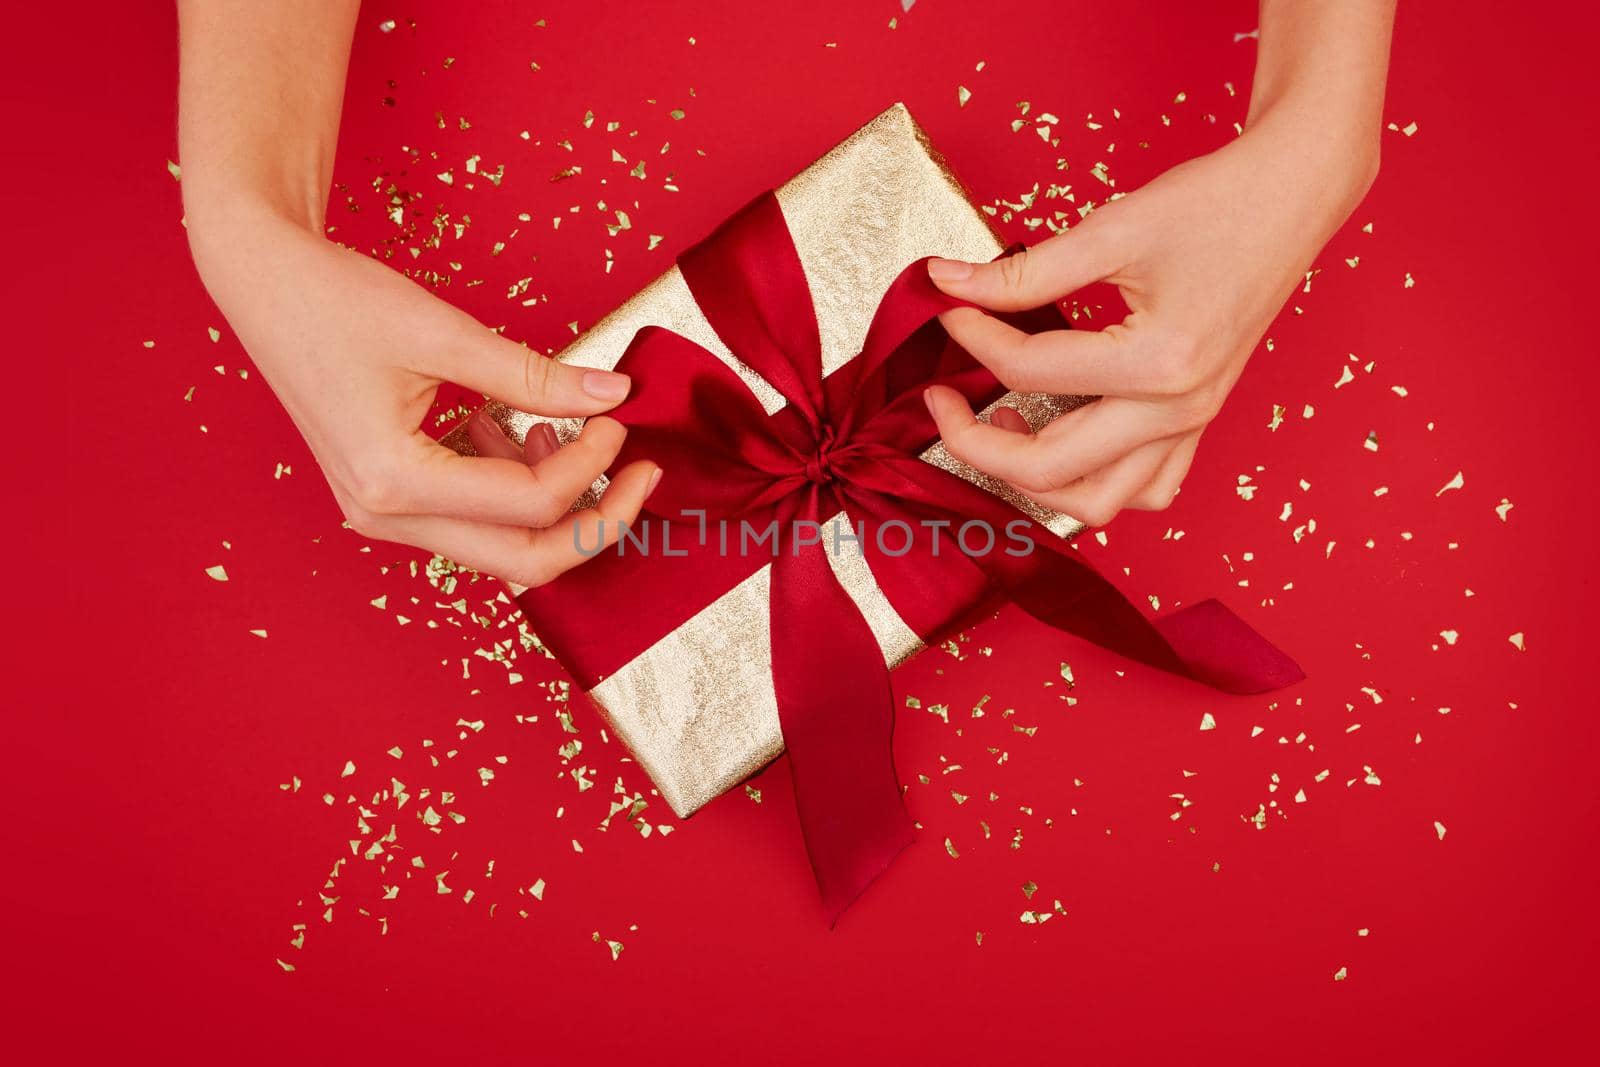 Hands tying a bow on a gift red background by Demkat